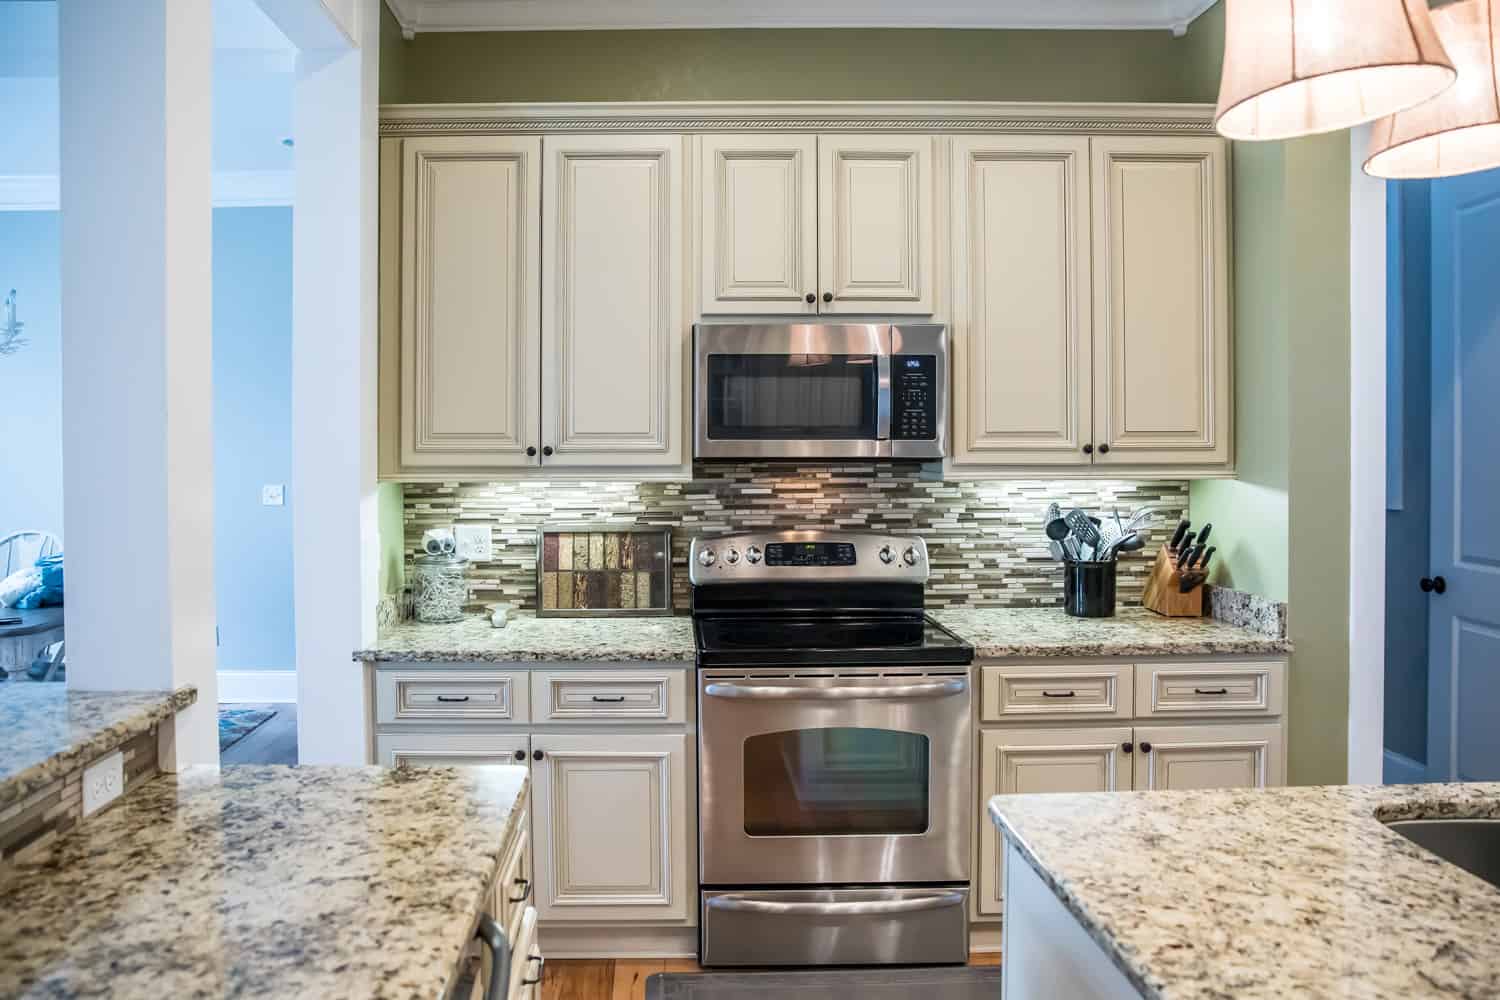 A small appliance microwave in a green kitchen with cream colored cabinets in a new construction home with granite countertops and lots of cabinets and storage space